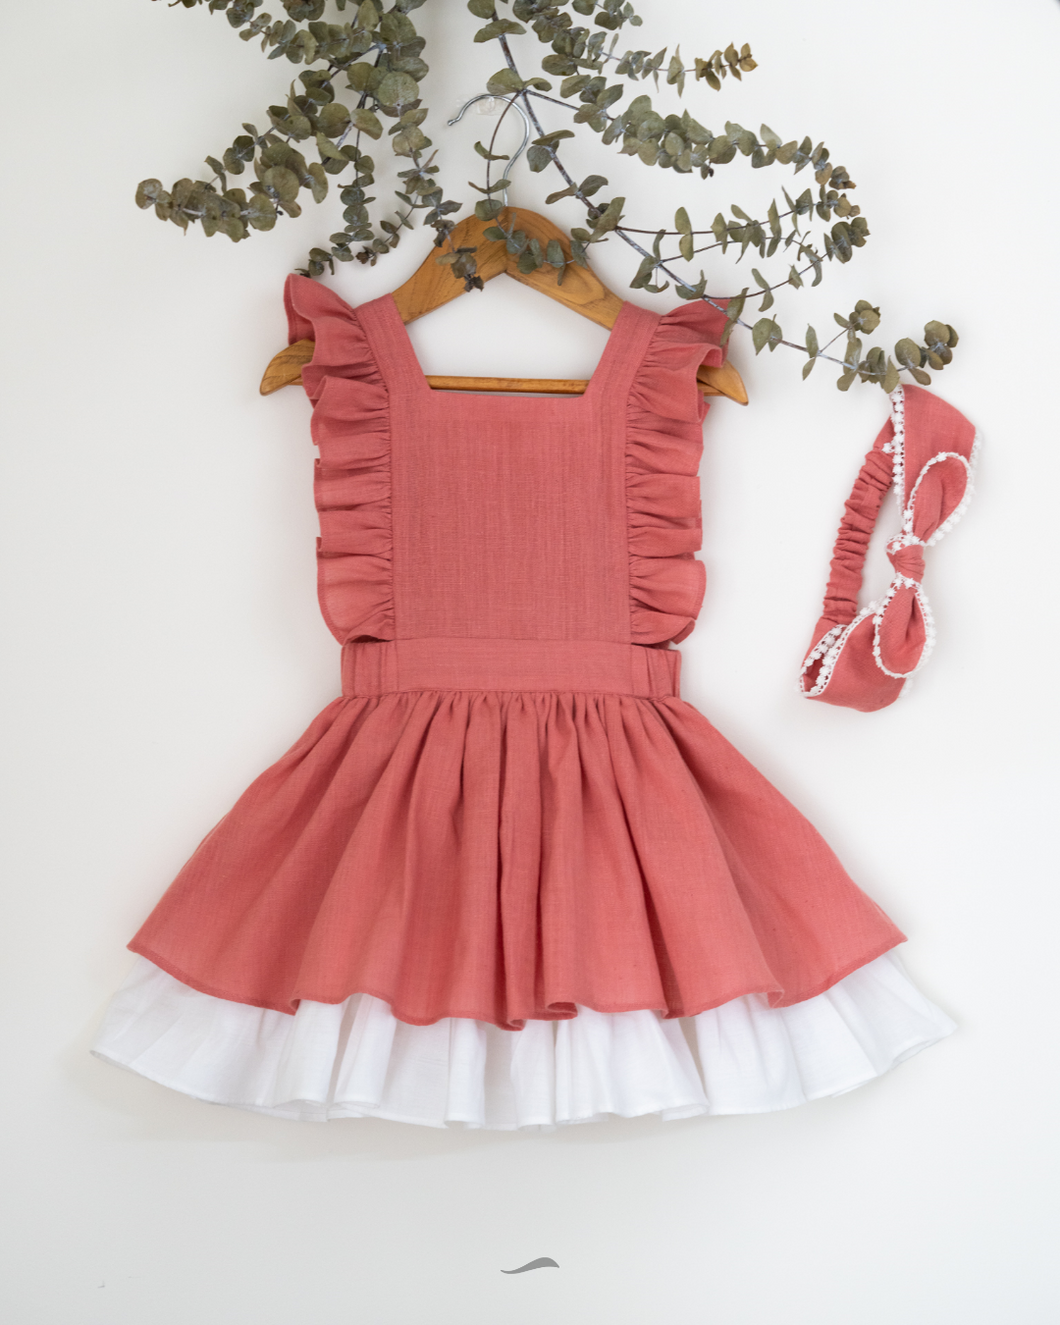 A beautiful dress with a criss-cross back hung on a hanger with a matching hair accessory beside it with a stem of leaves upon it.